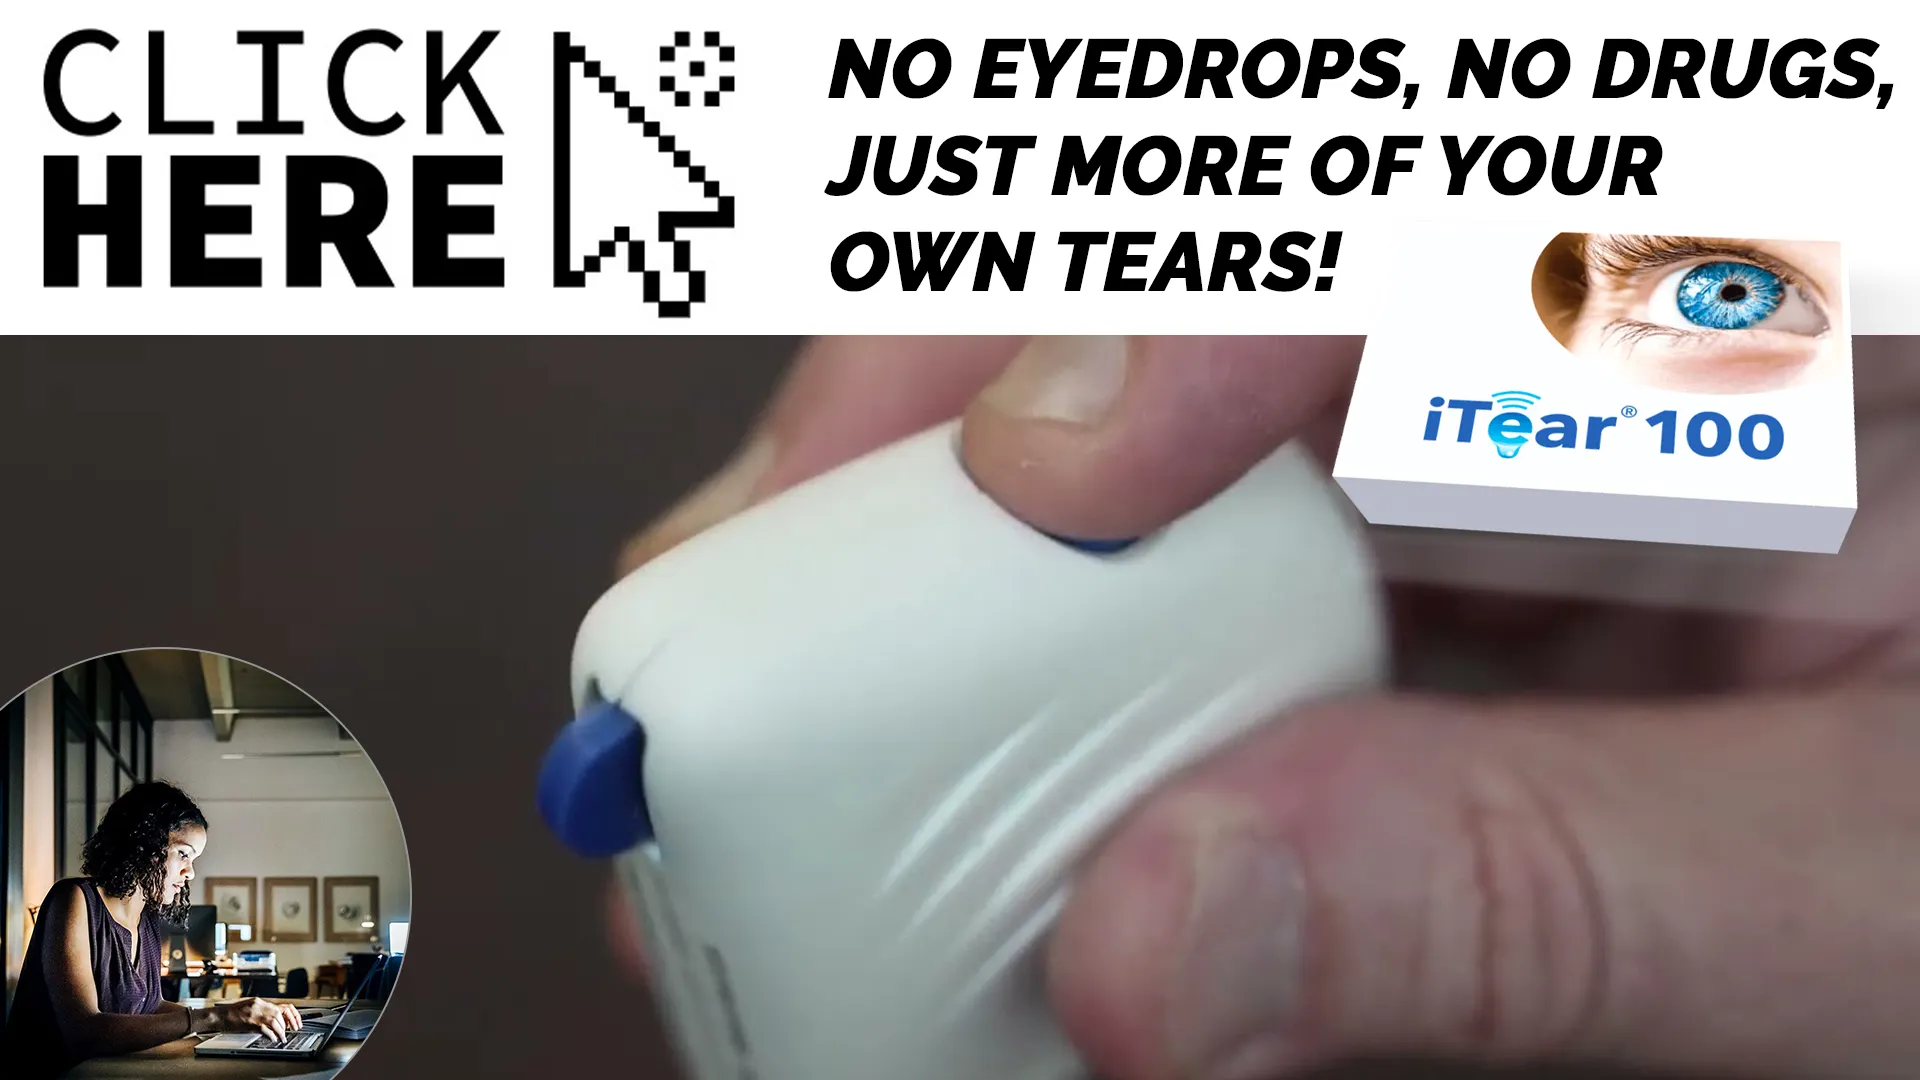 Comparing iTear100 to Traditional Eye Drop Treatments